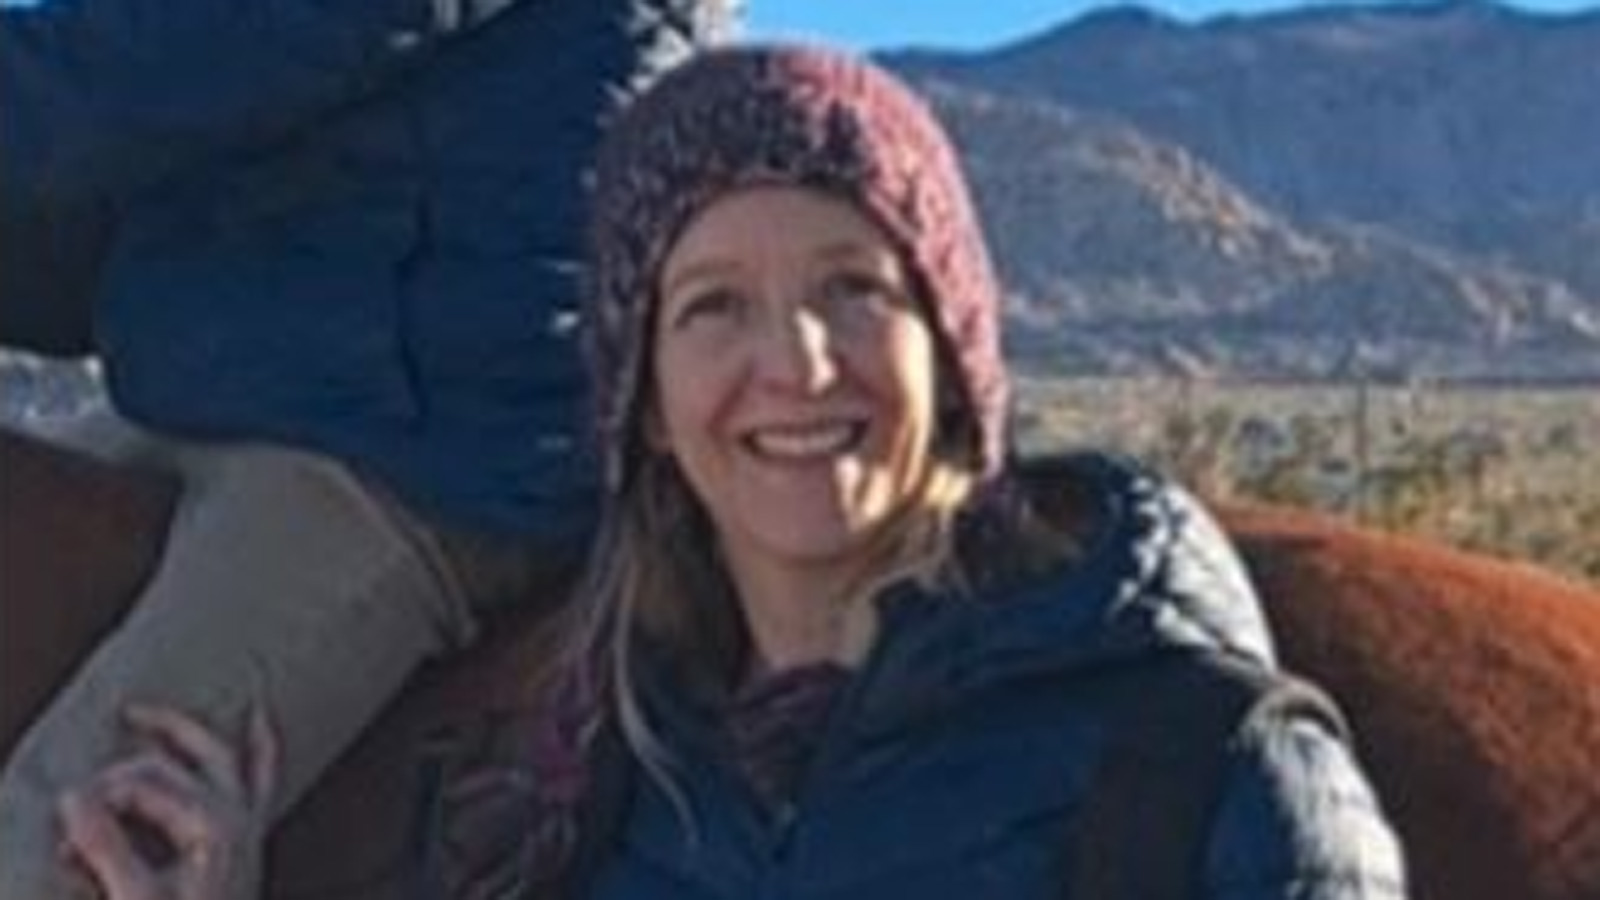 Kelly Paduchowski of Flagstaff was reported missing on June 30....